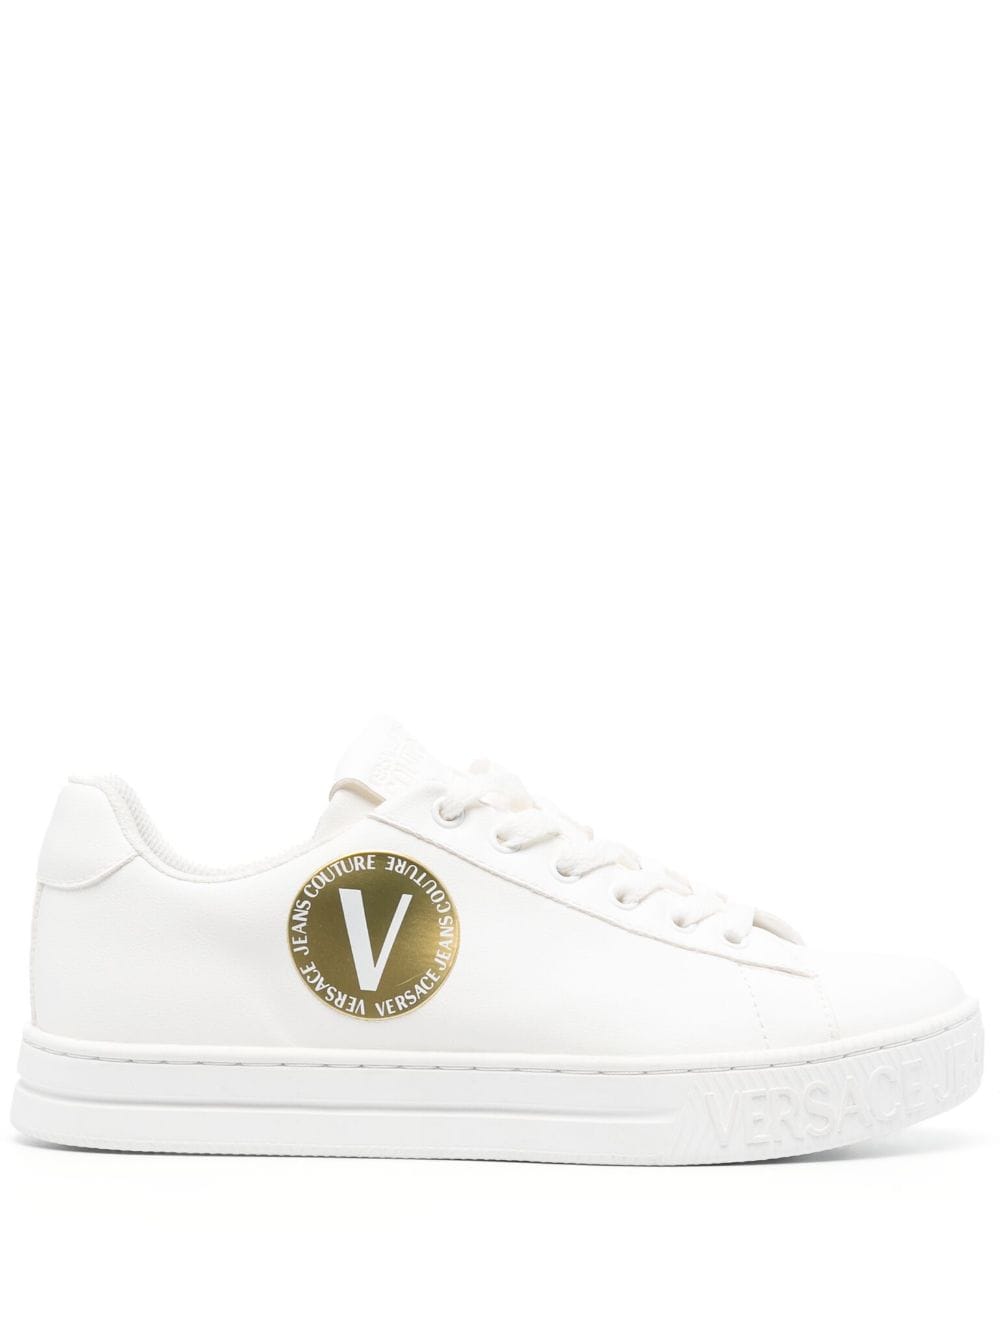 Versace Jeans Couture logo-patch round-toe sneakers - White von Versace Jeans Couture